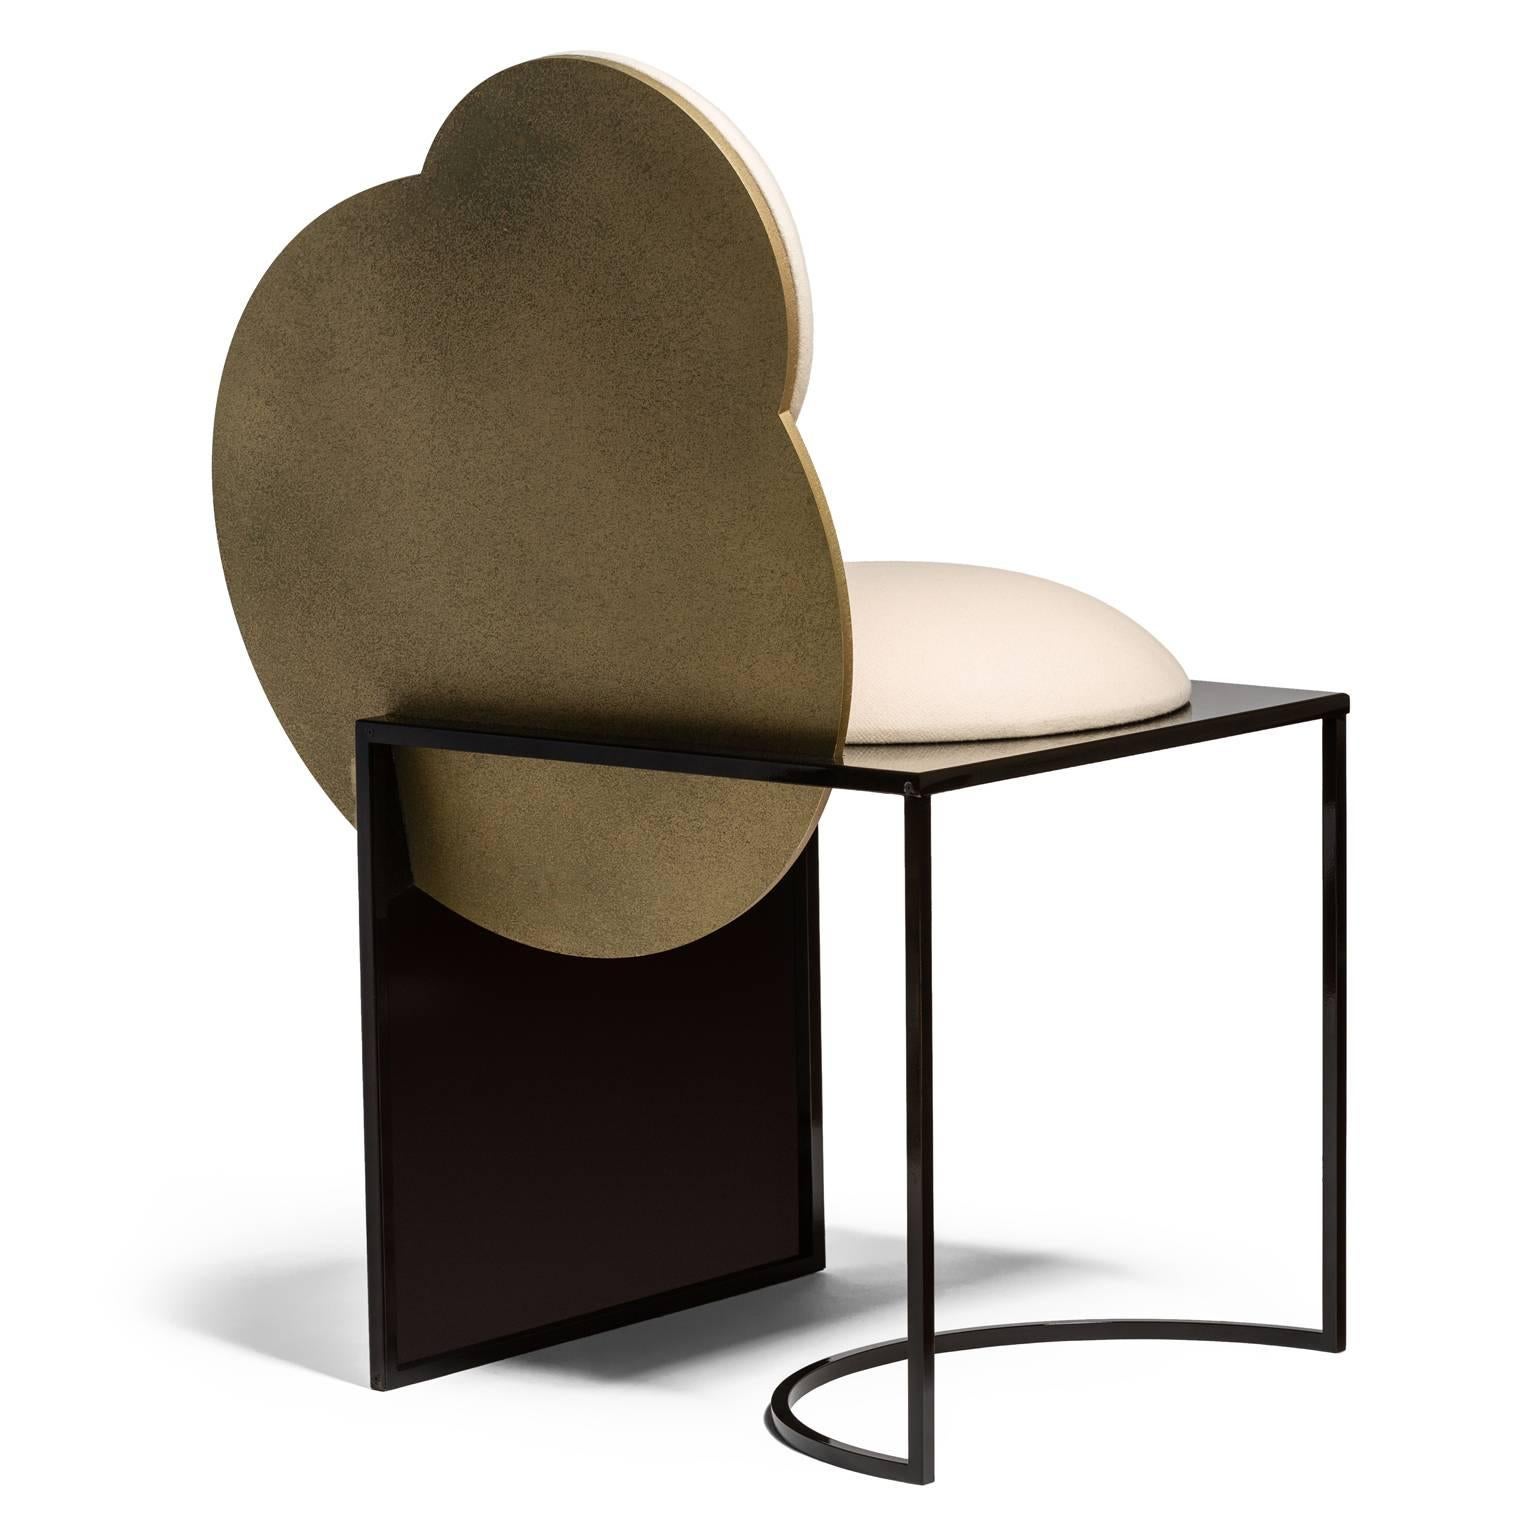 Modern Celeste Chair in White Fabric and Metal, by Lara Bohinc, in Stock